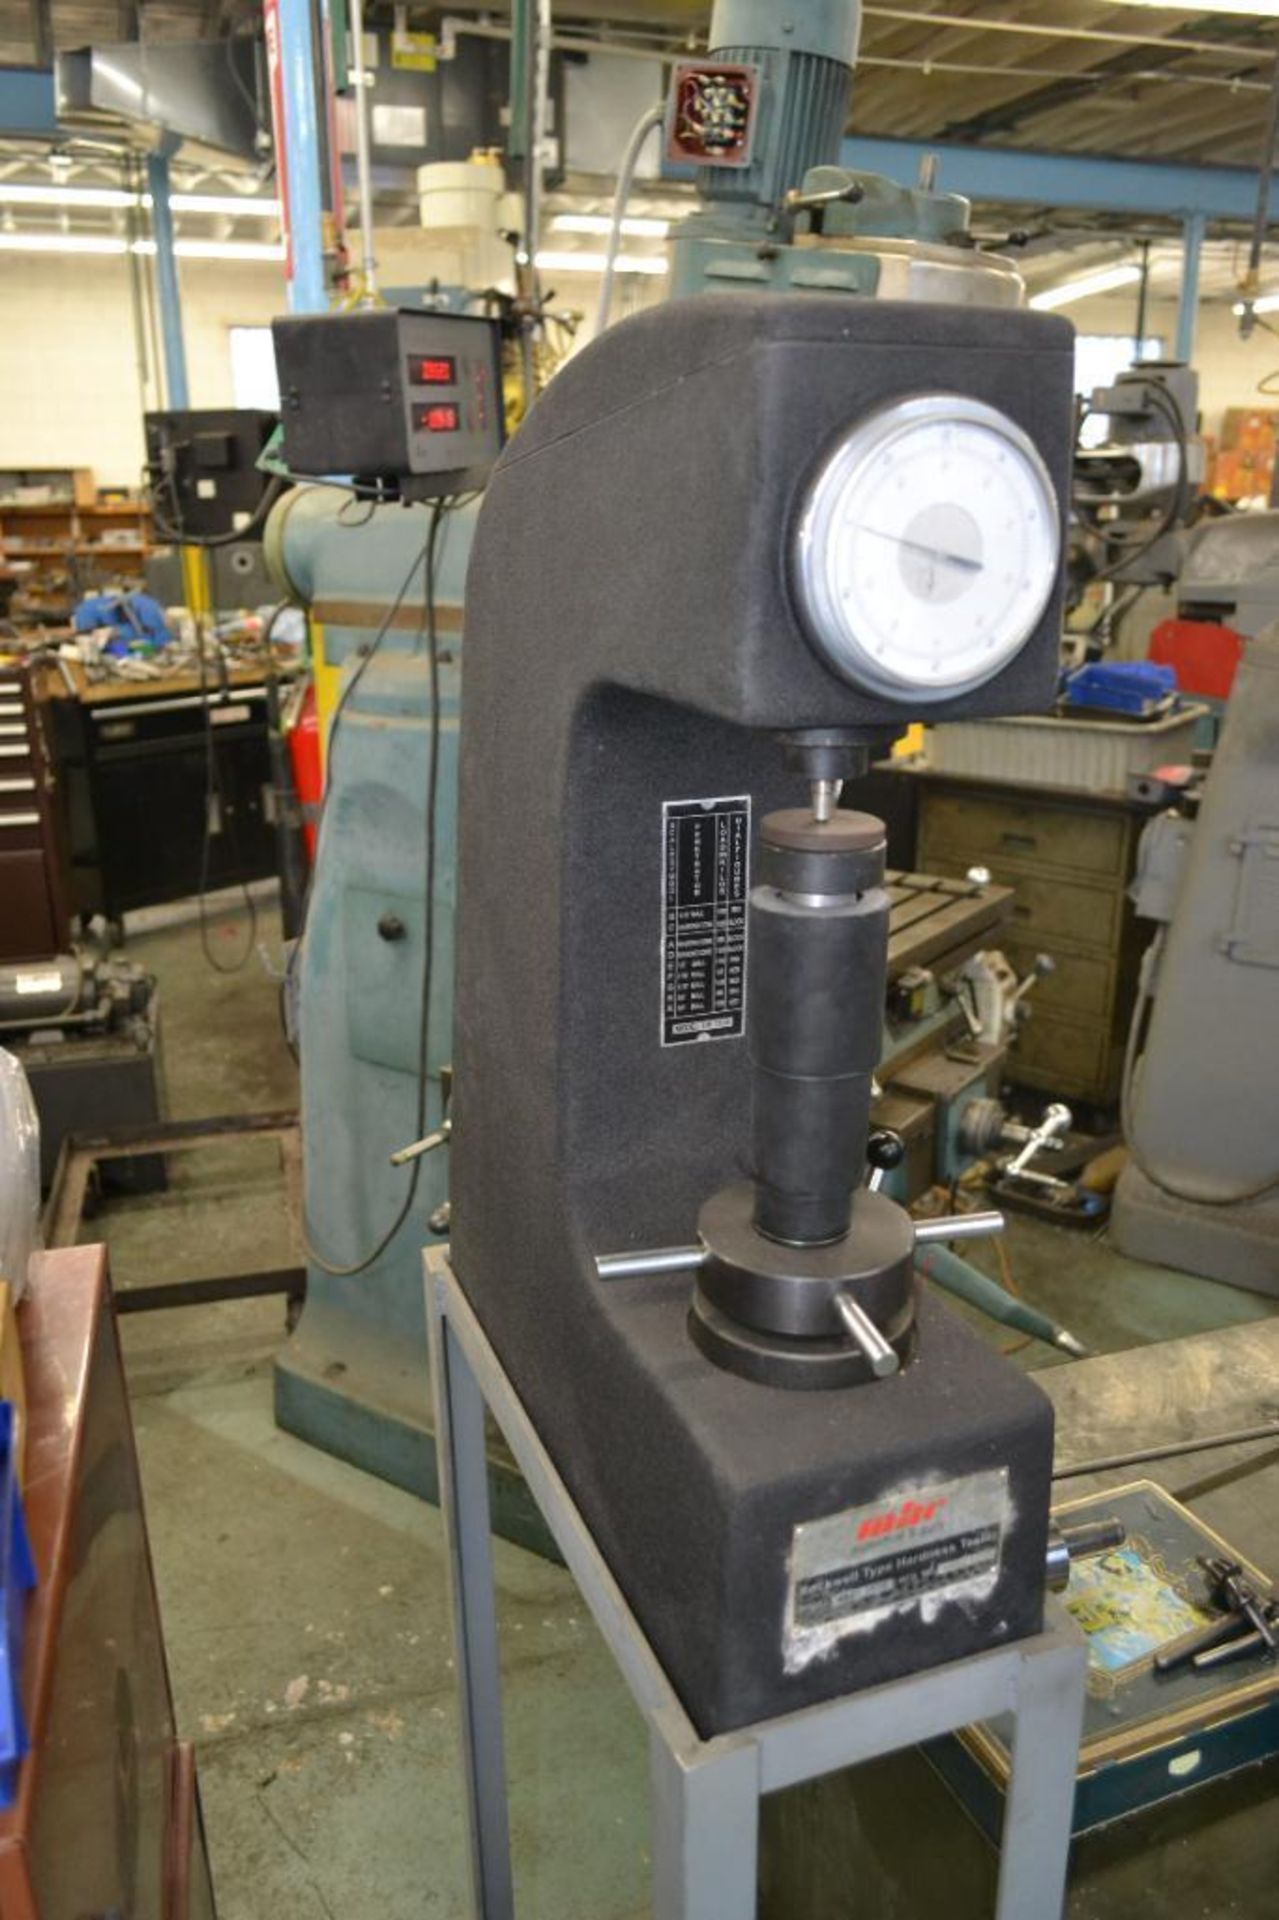 MBC Hardness Tester Model HR150A/6639-2030, S/N 211708023 w/ Accessories - Image 3 of 6